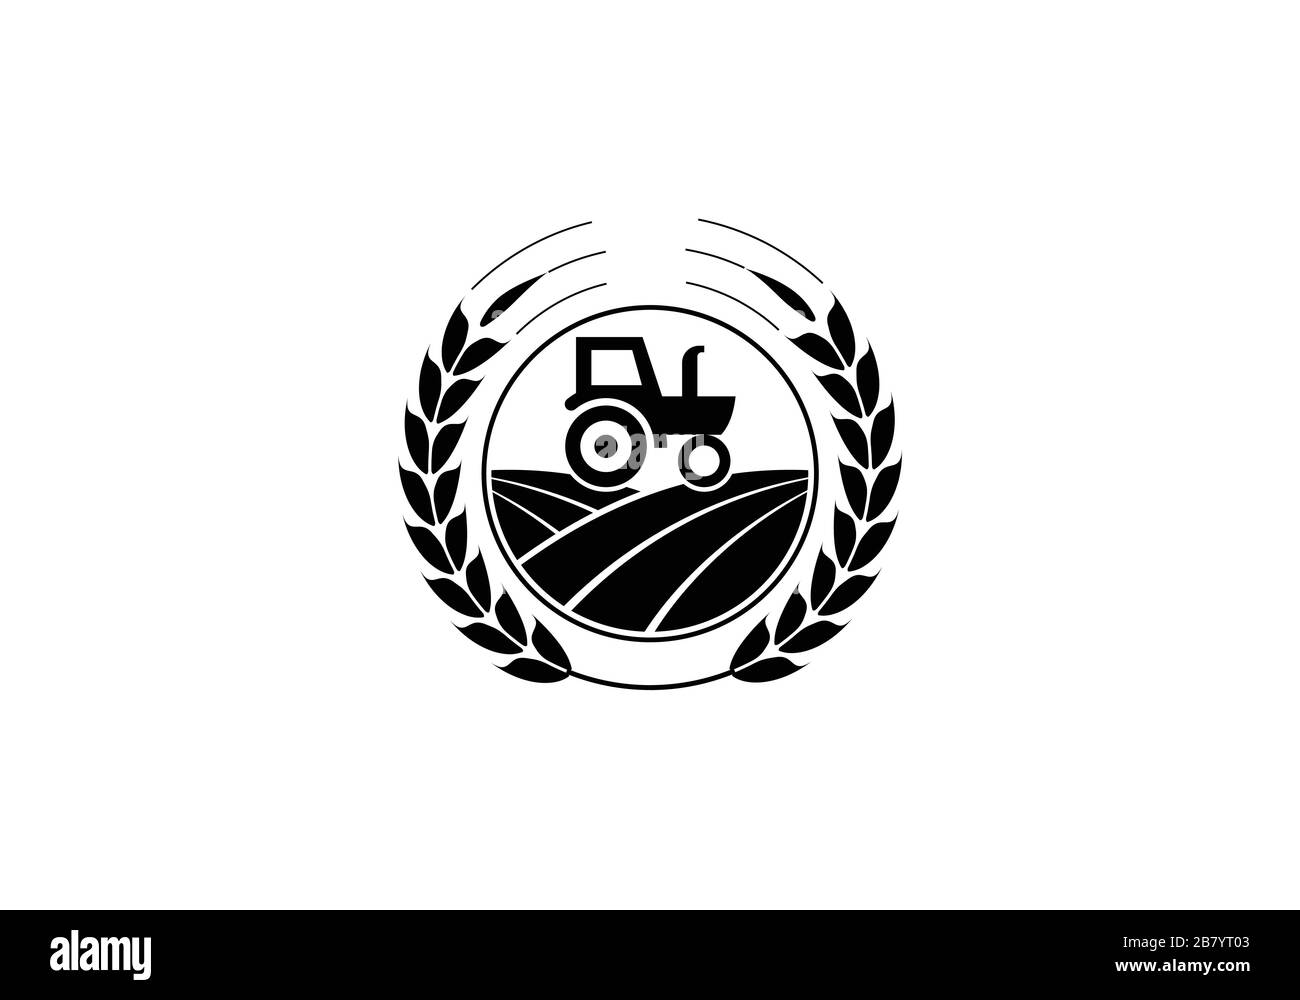 Tractor logo or farm logo template, Suitable for any business related to agriculture industries. Stock Vector